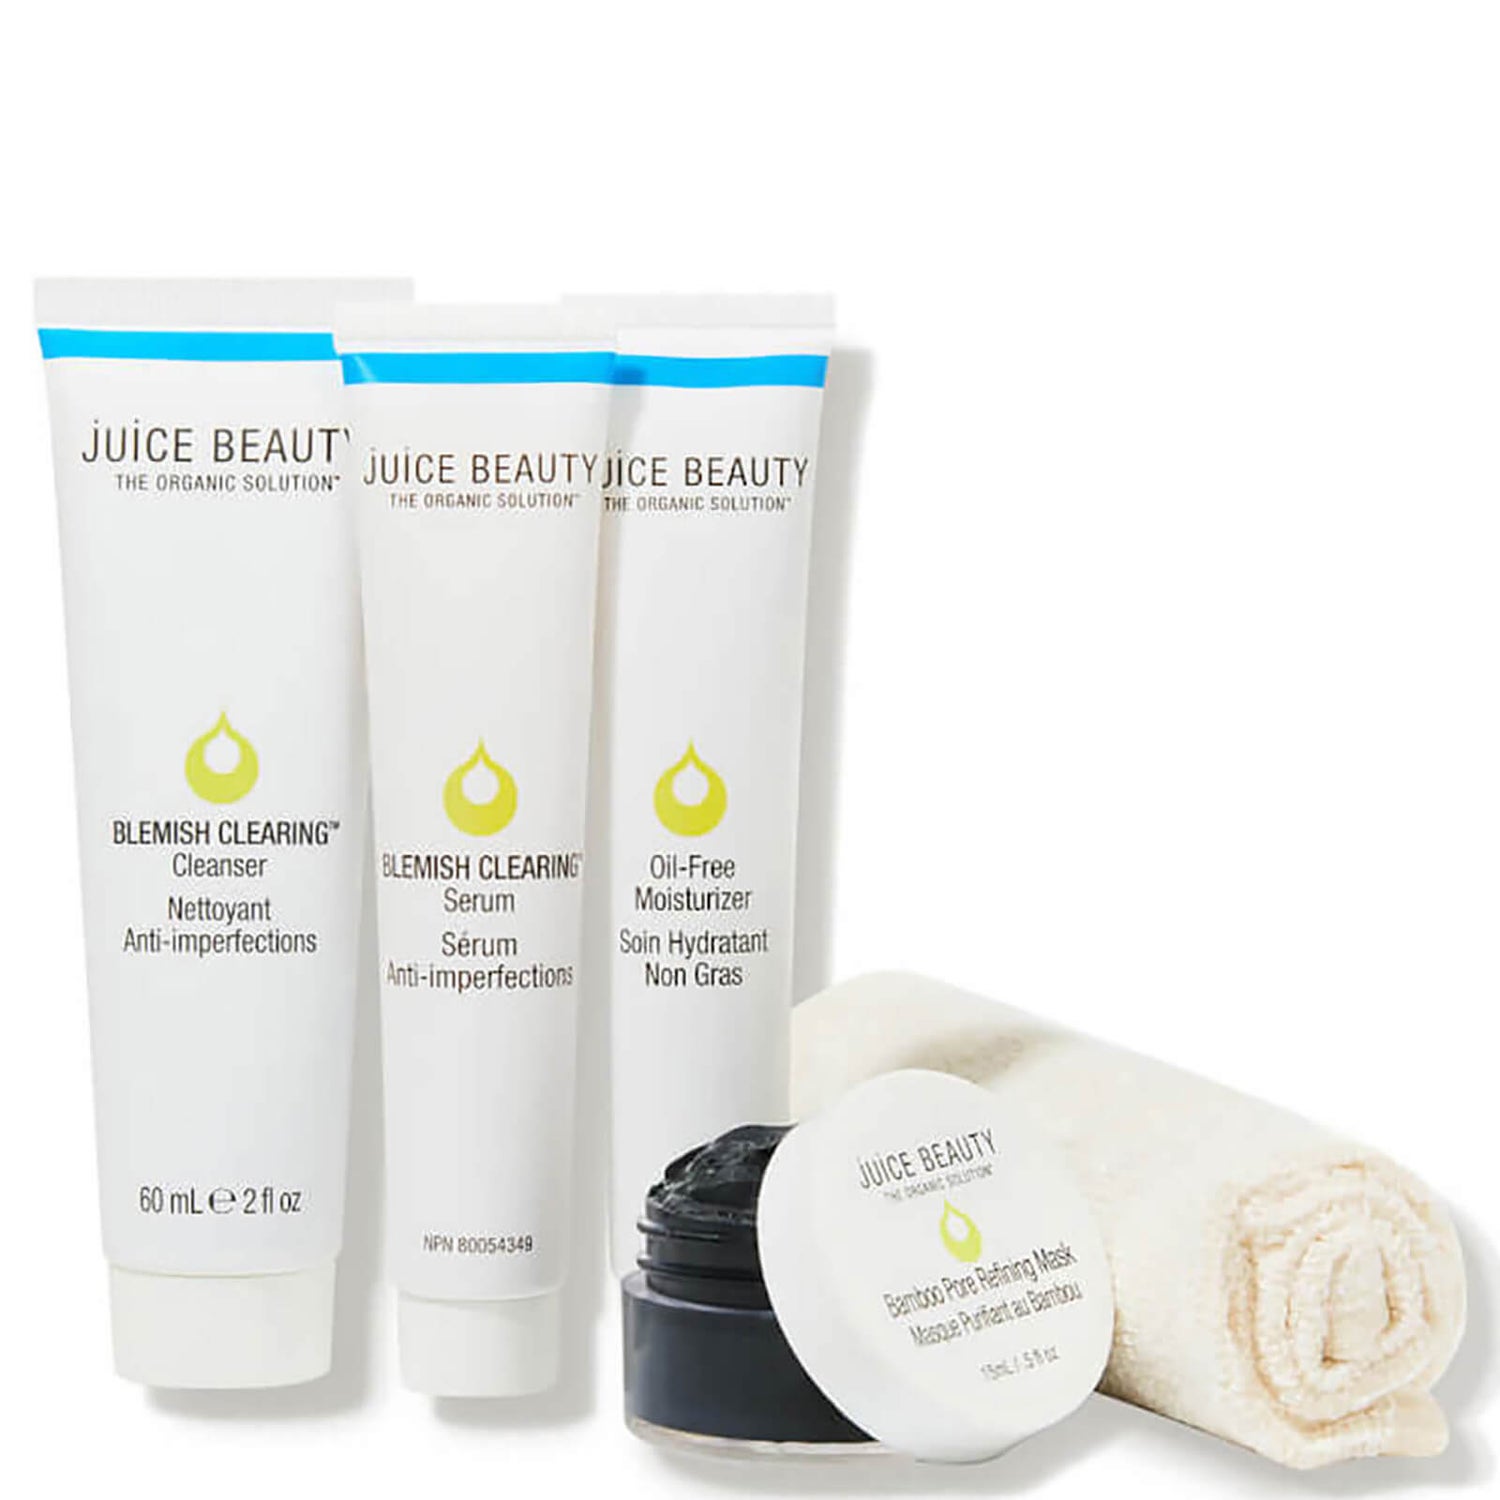 Juice Beauty Blemish Clearing Solutions Kit (Worth $50.00)